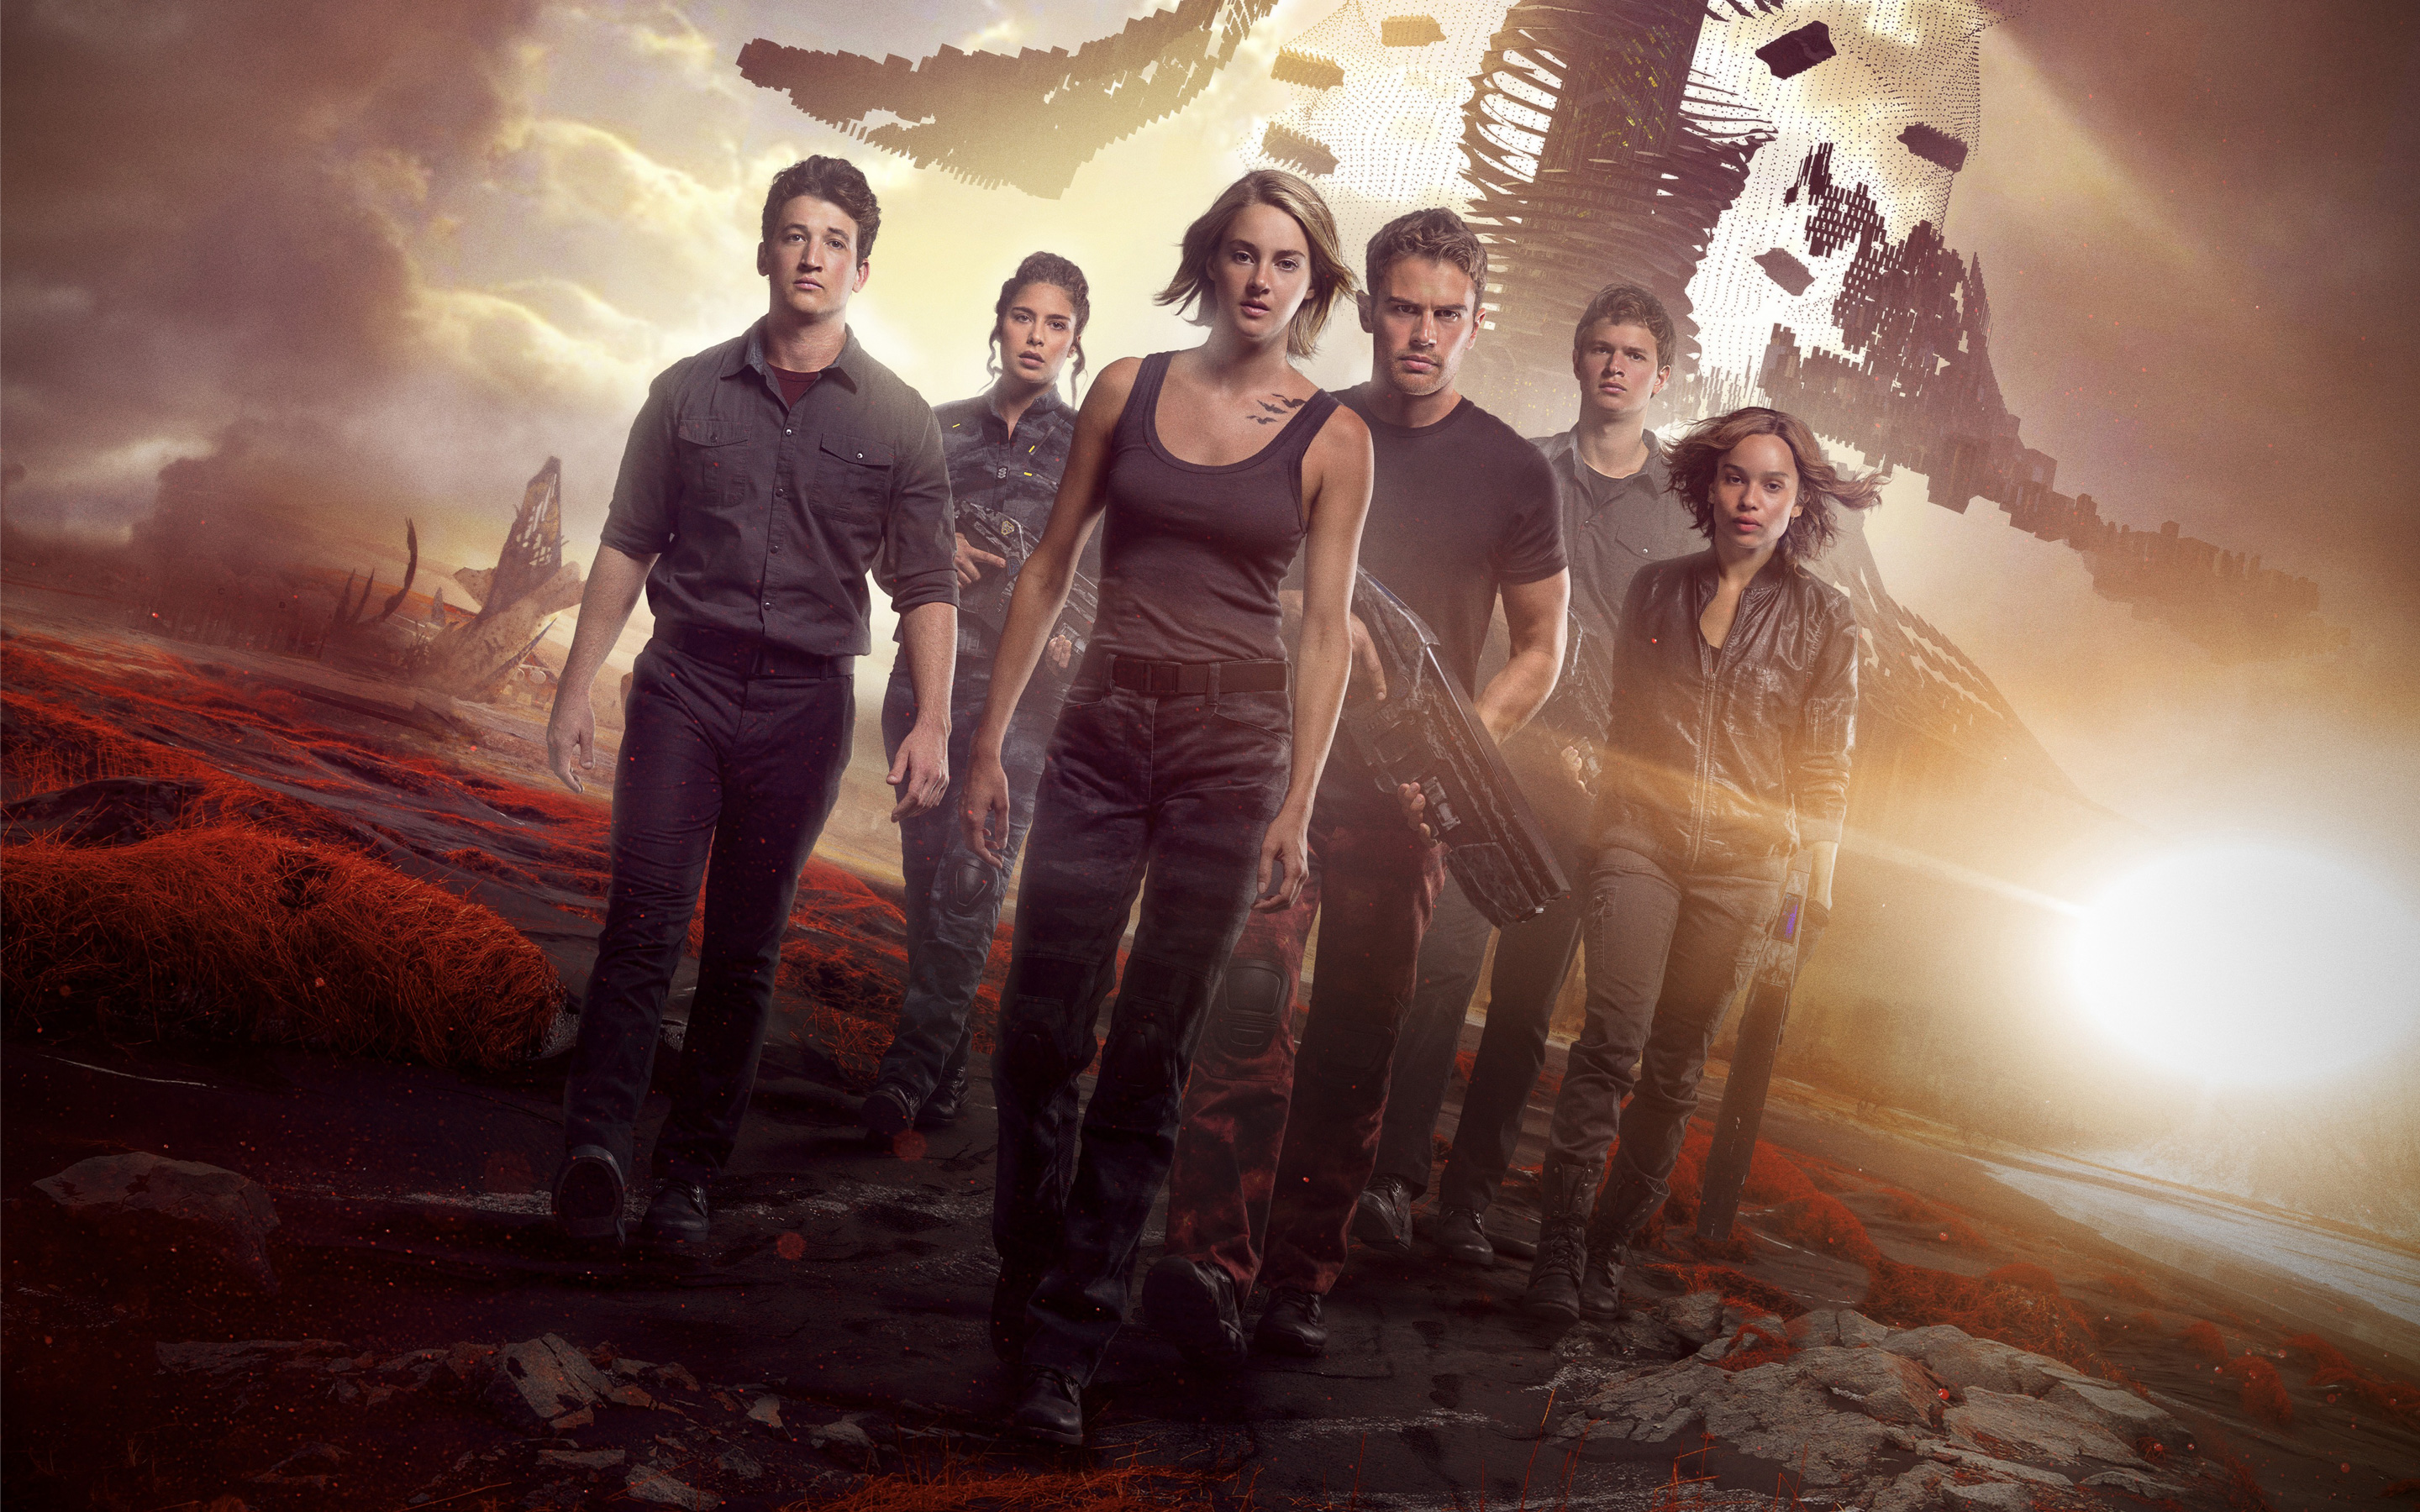 THE DIVERGENT SERIES: ALLEGIANT Comes Off As Silly and Drawn-Out